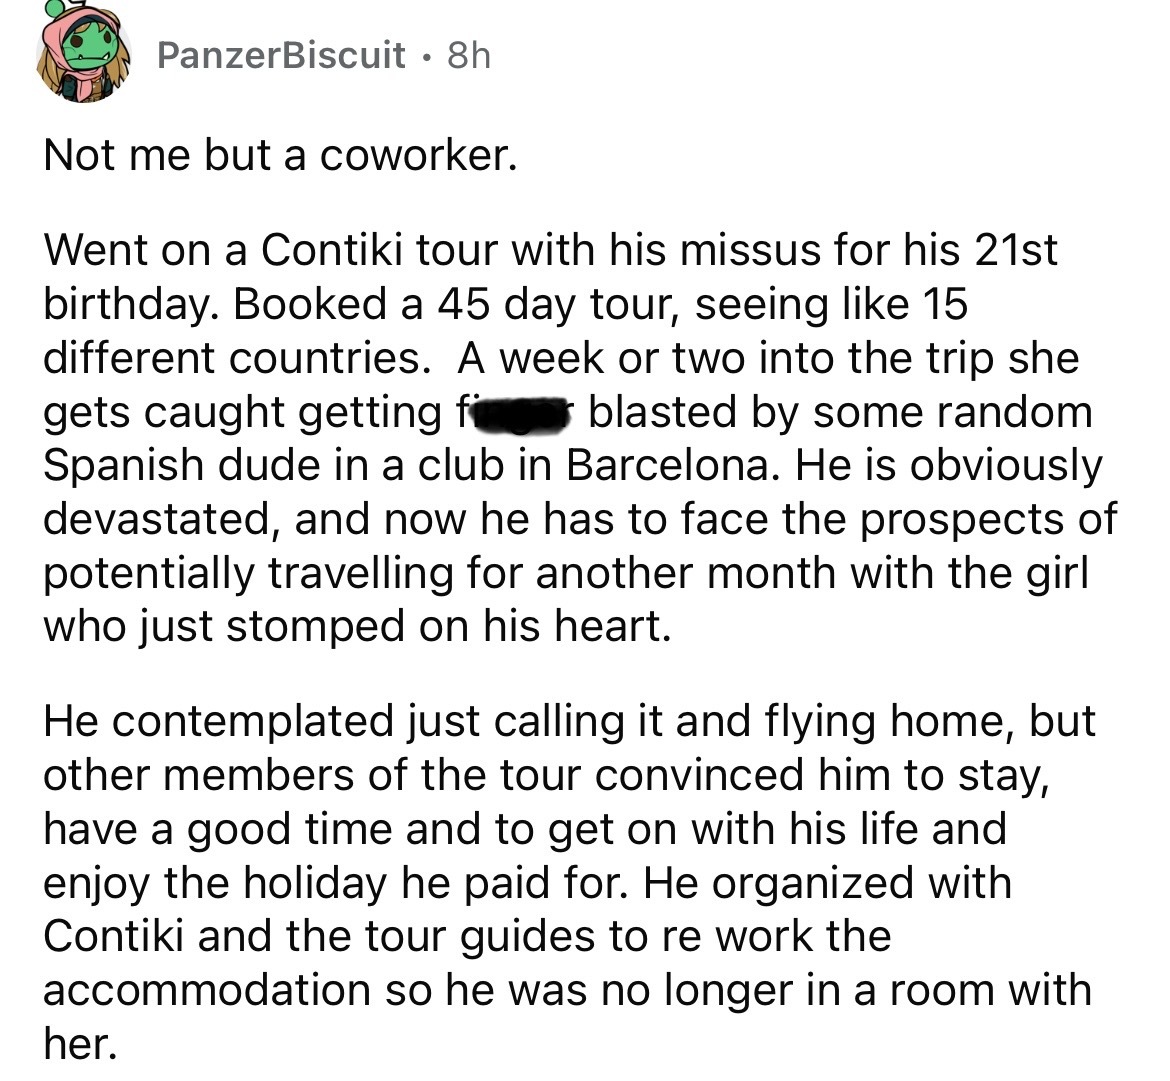 screenshot - PanzerBiscuit 8h Not me but a coworker. Went on a Contiki tour with his missus for his 21st birthday. Booked a 45 day tour, seeing 15 different countries. A week or two into the trip she gets caught getting f blasted by some random Spanish du